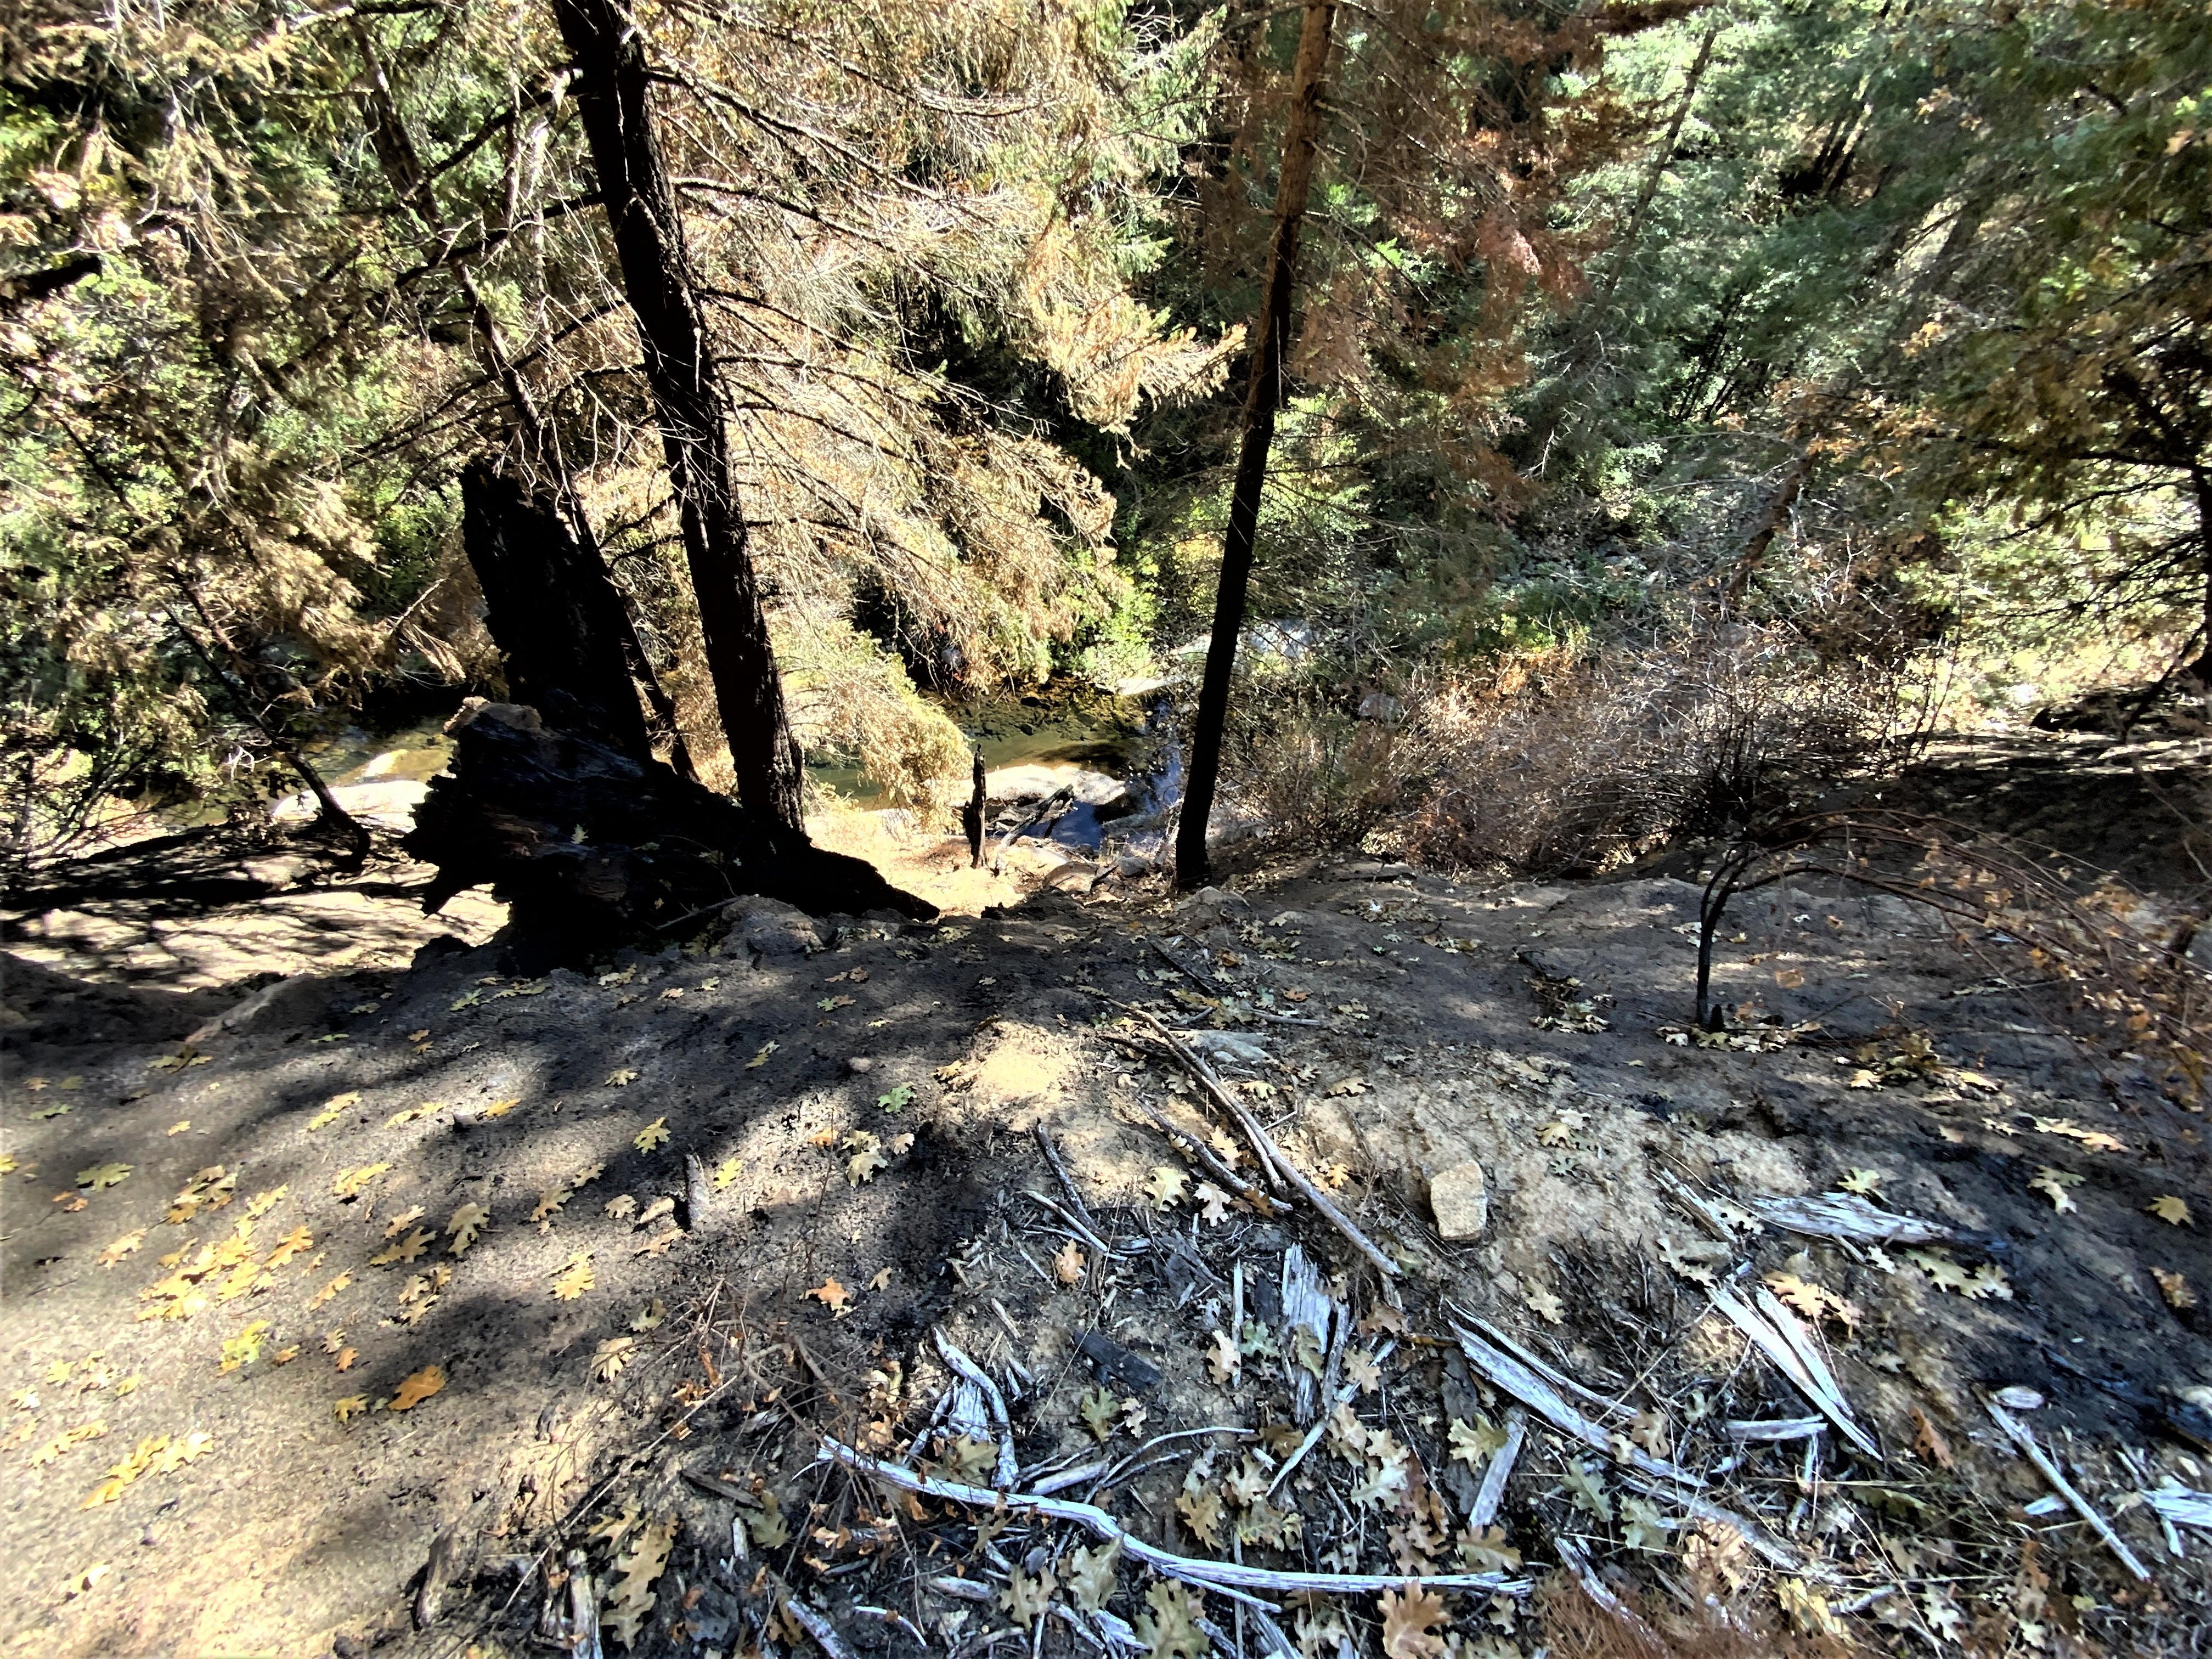 Image showing The Beginning of an edge failure on FS road 13N48 above Pilot Creek in Mosquito burned area